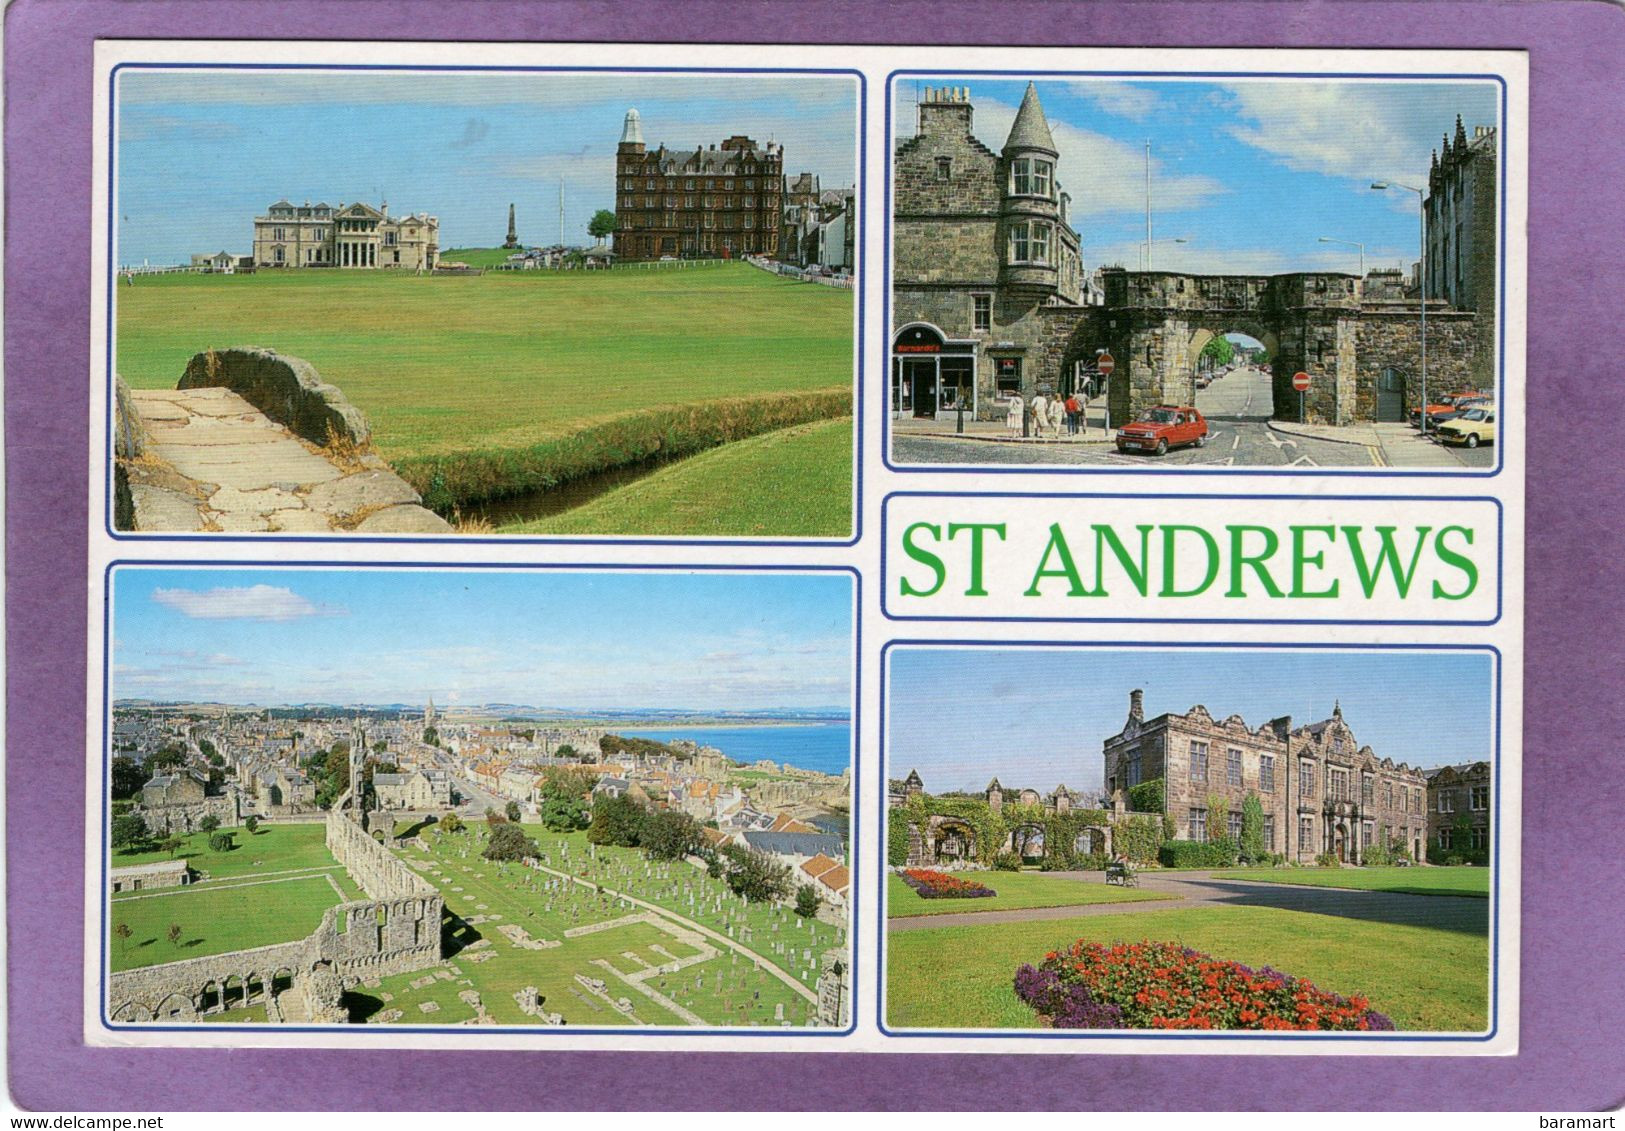 ST ANDREWS The R. & A. From Swilcan Burn. West Port. The Univeristy Town Of St Andrews United College Quadrangle - Fife